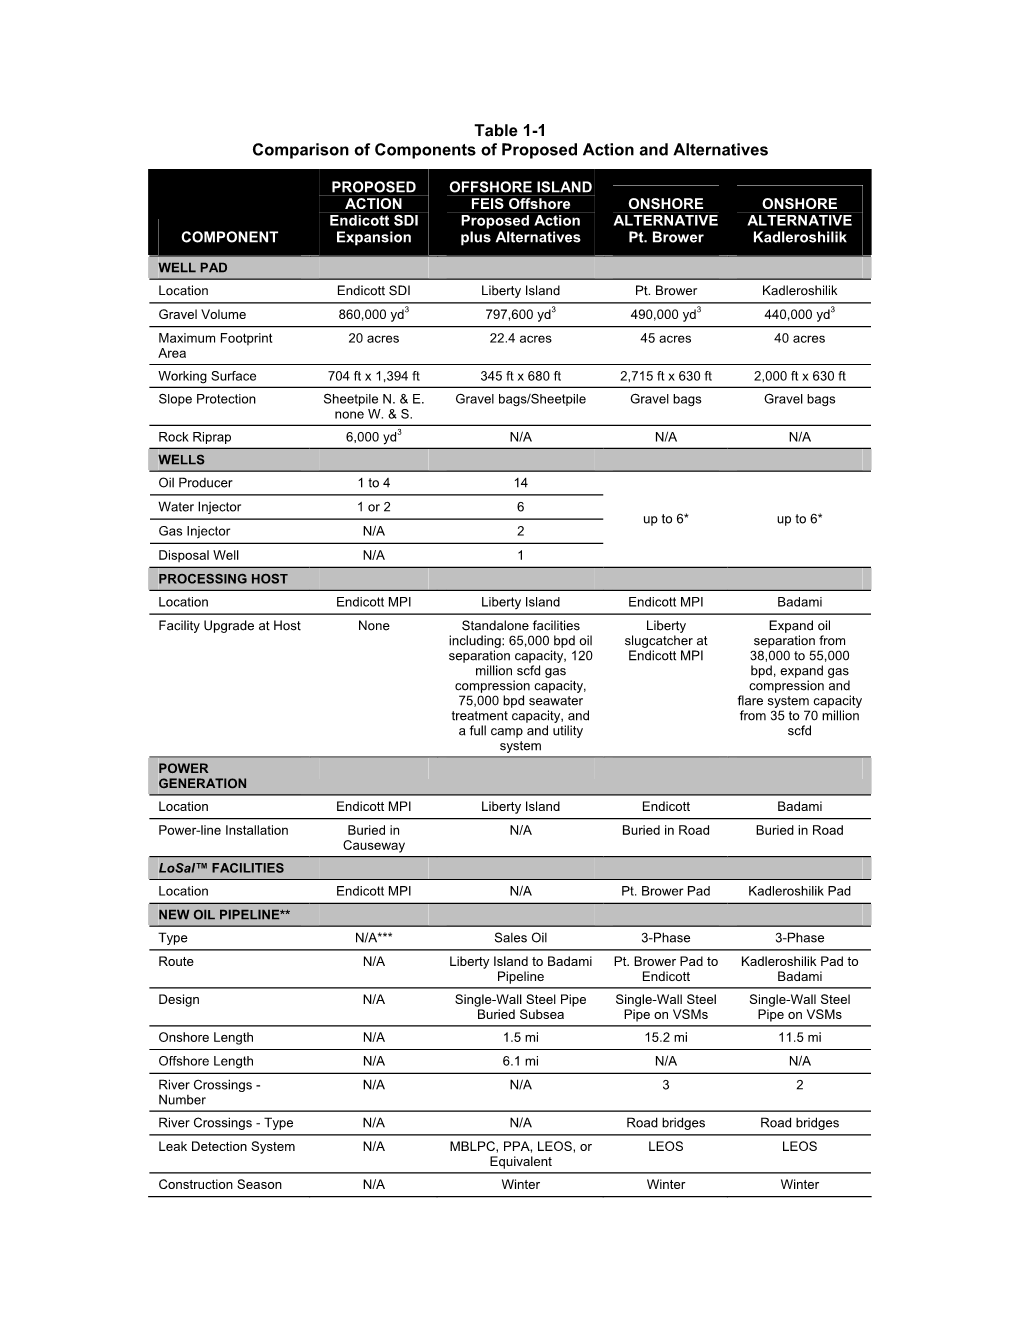 Table 1-1 Comparison of Components of Proposed Action and Alternatives